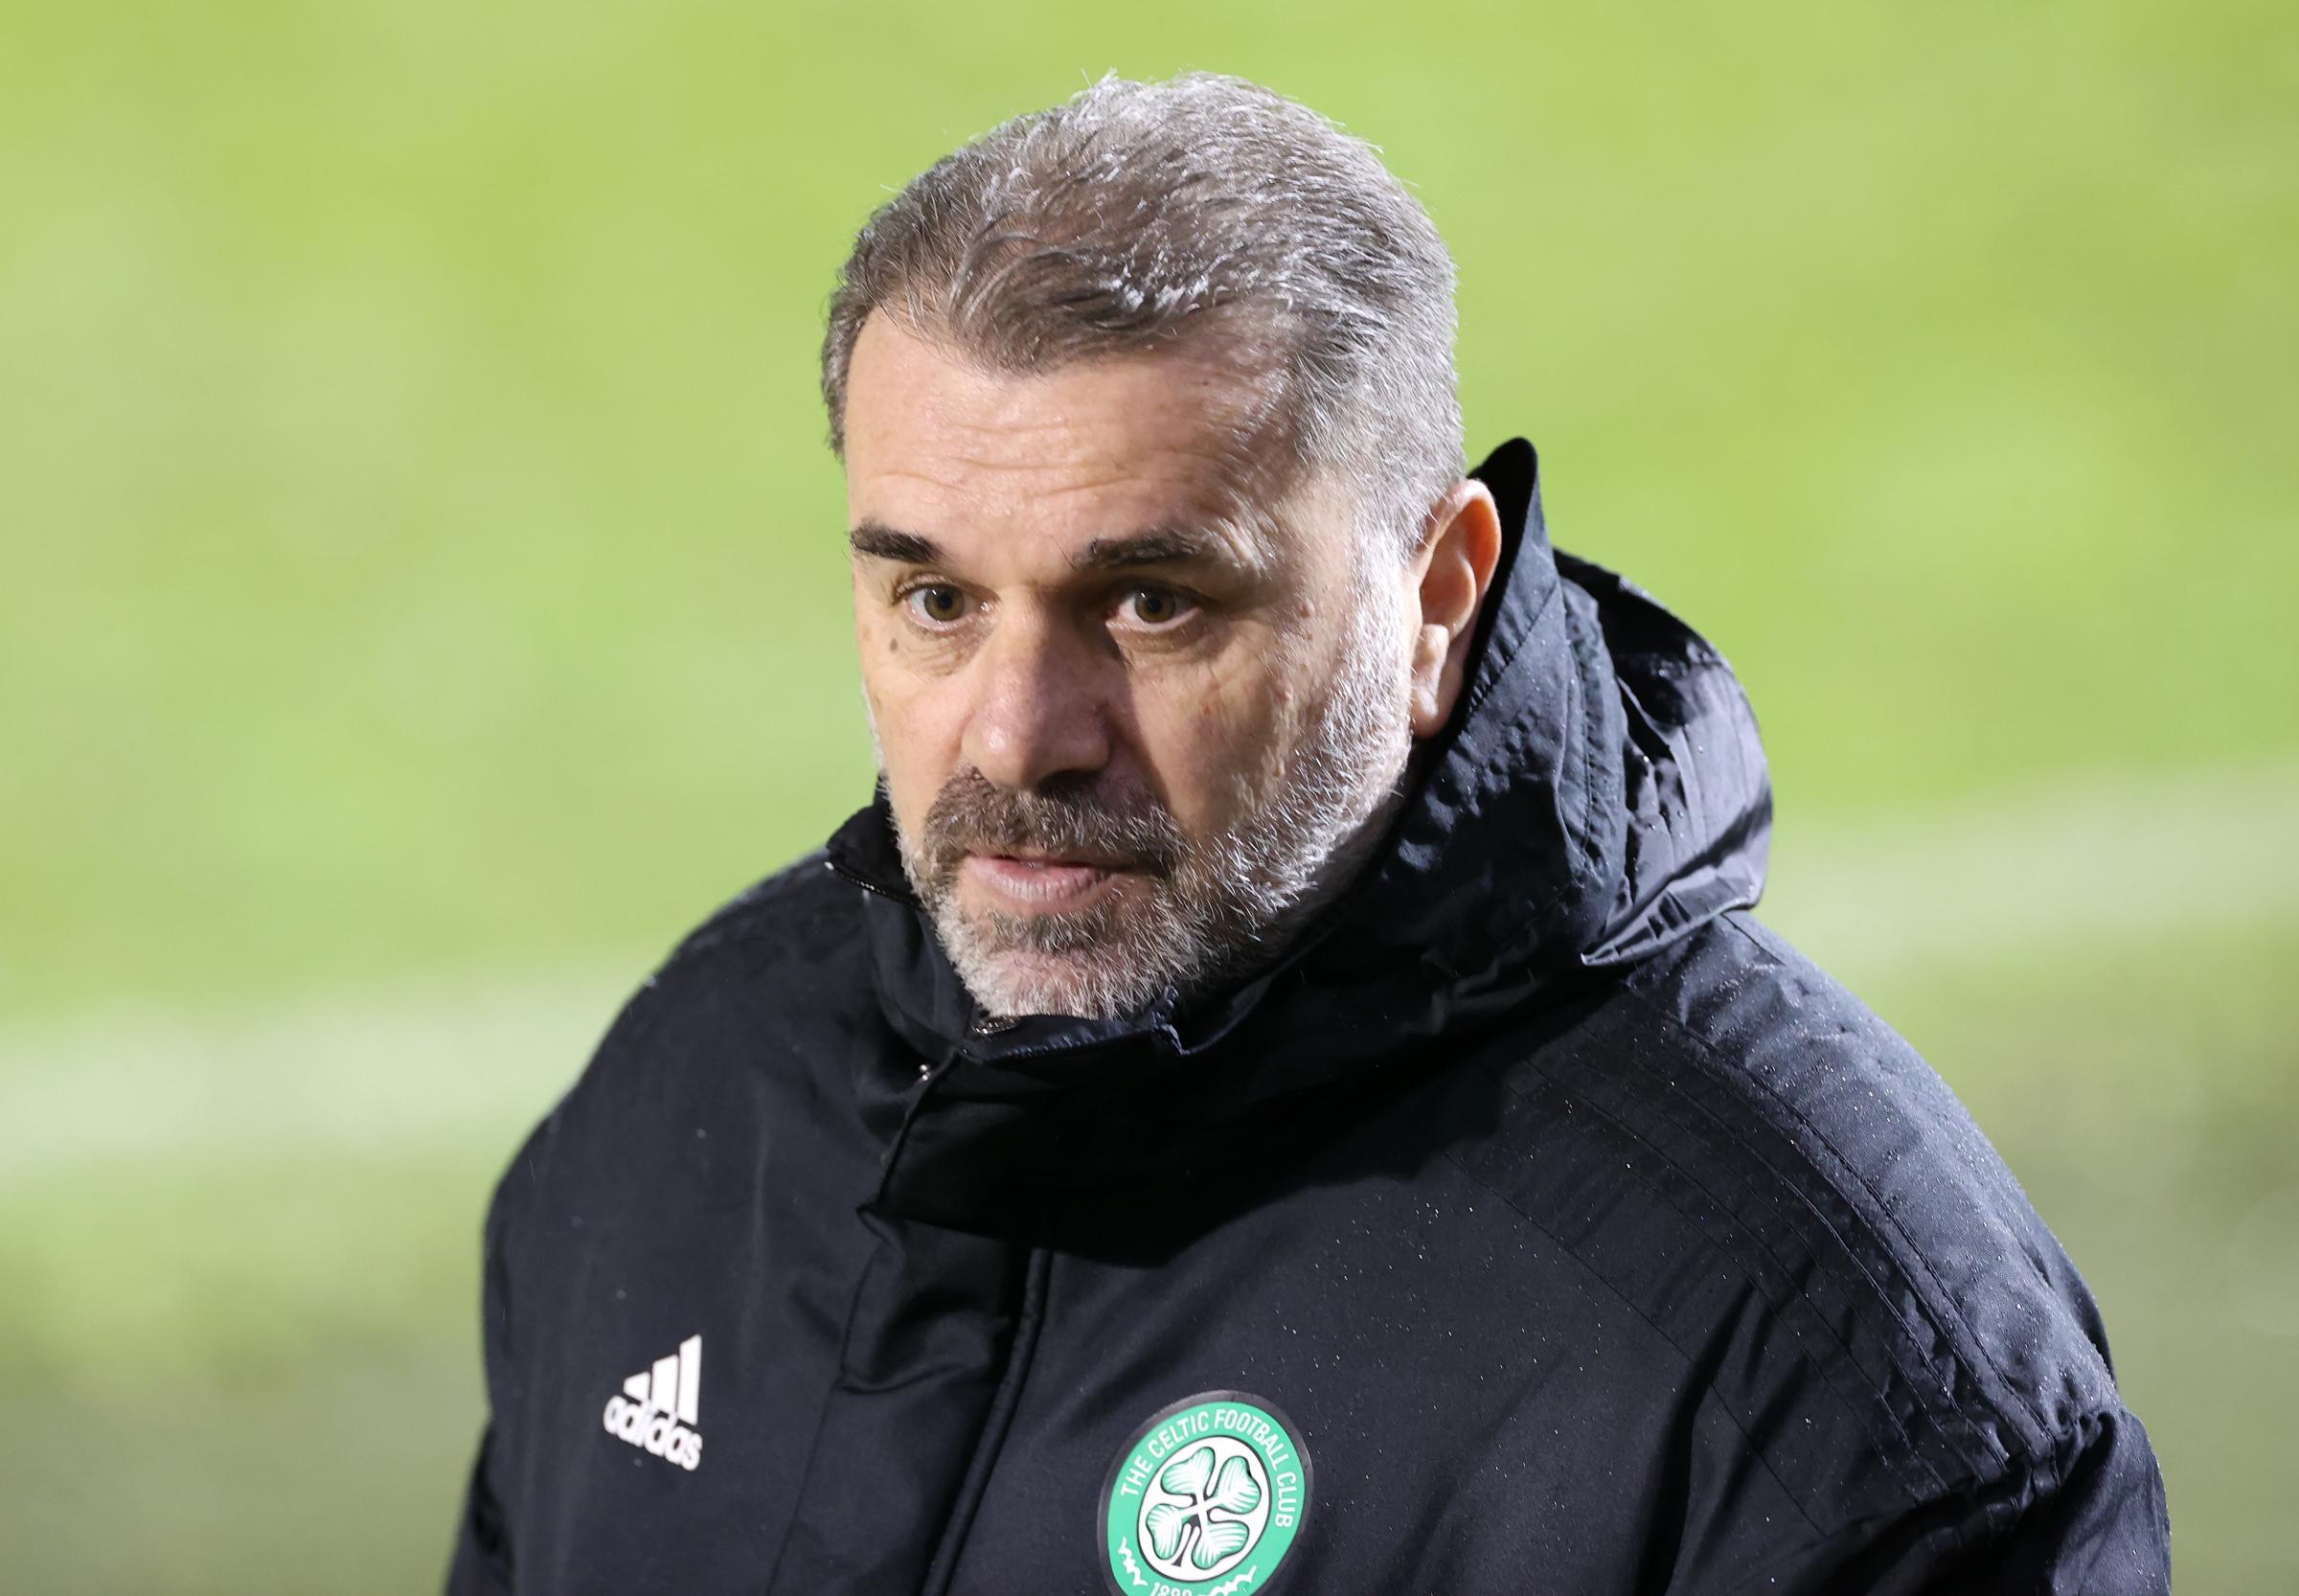 Big Celtic switch turnover lands Ange Postecoglou’s facet FIFA World Switch Report point out